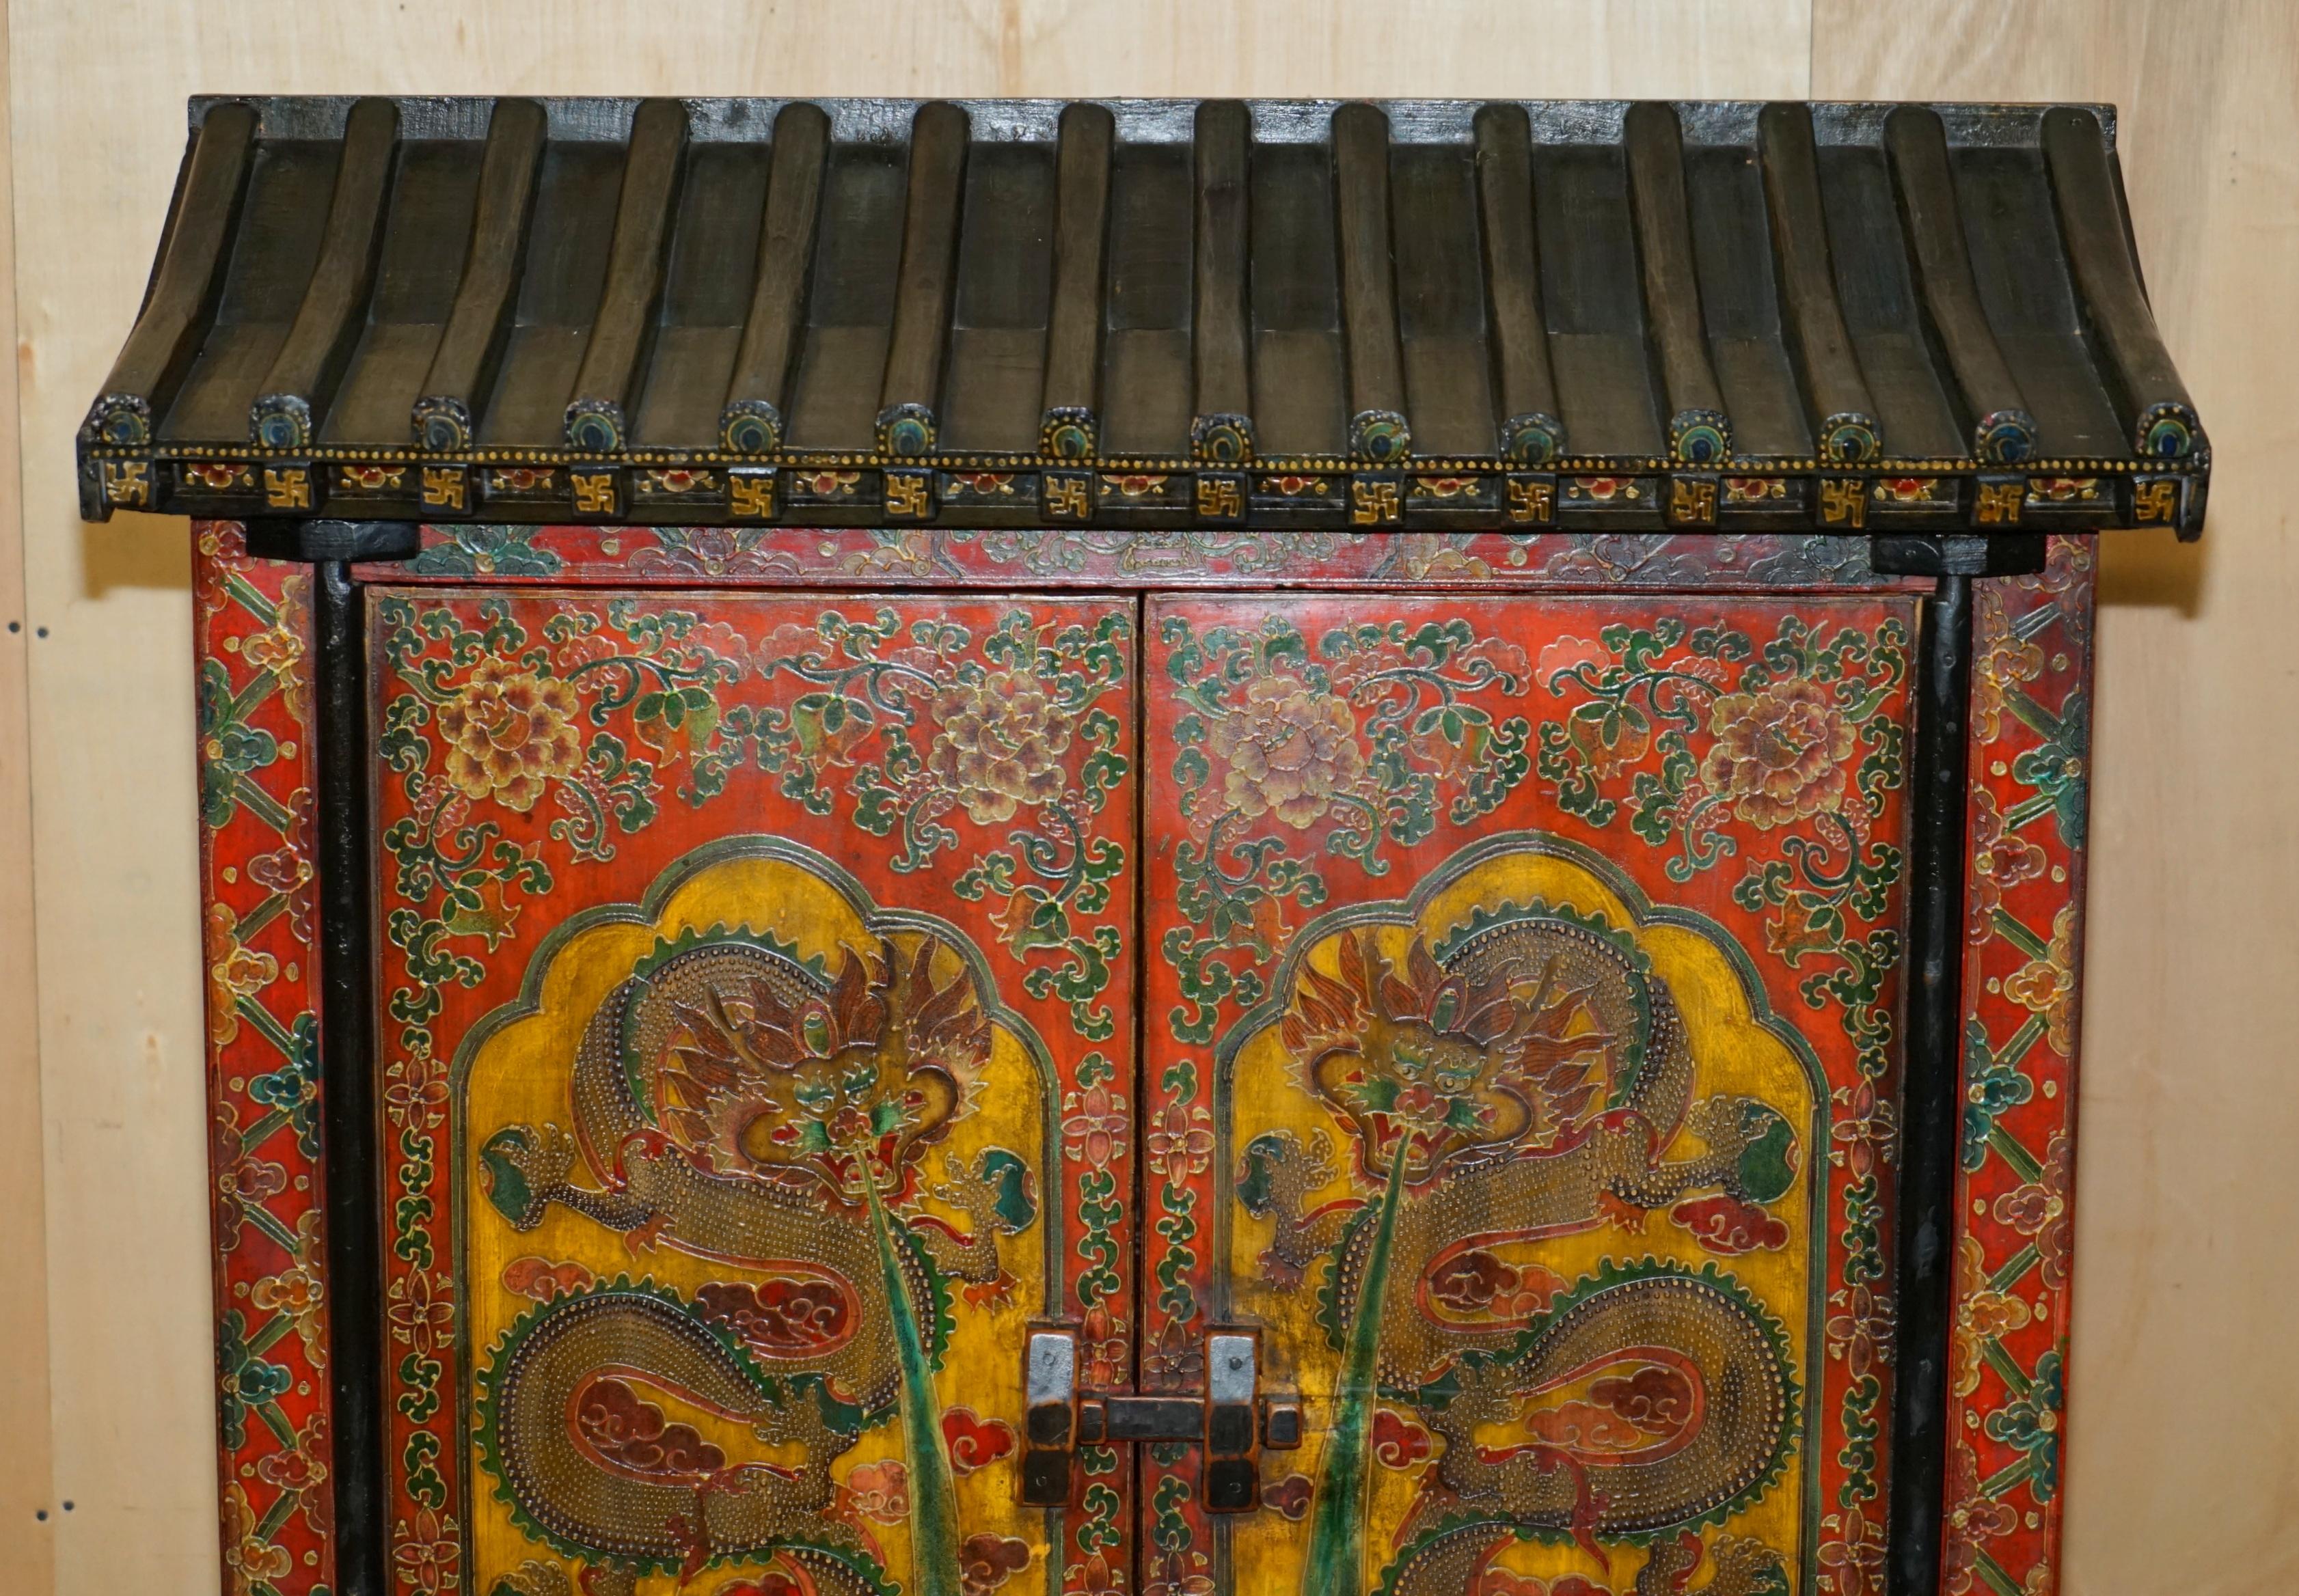 Royal House Antiques

Royal House Antiques is delighted to offer for sale this stunning Pagoda topped hand painted Chinese Wardrobe with drawers to the base

Please note the delivery fee listed is just a guide, it covers within the M25 only for the